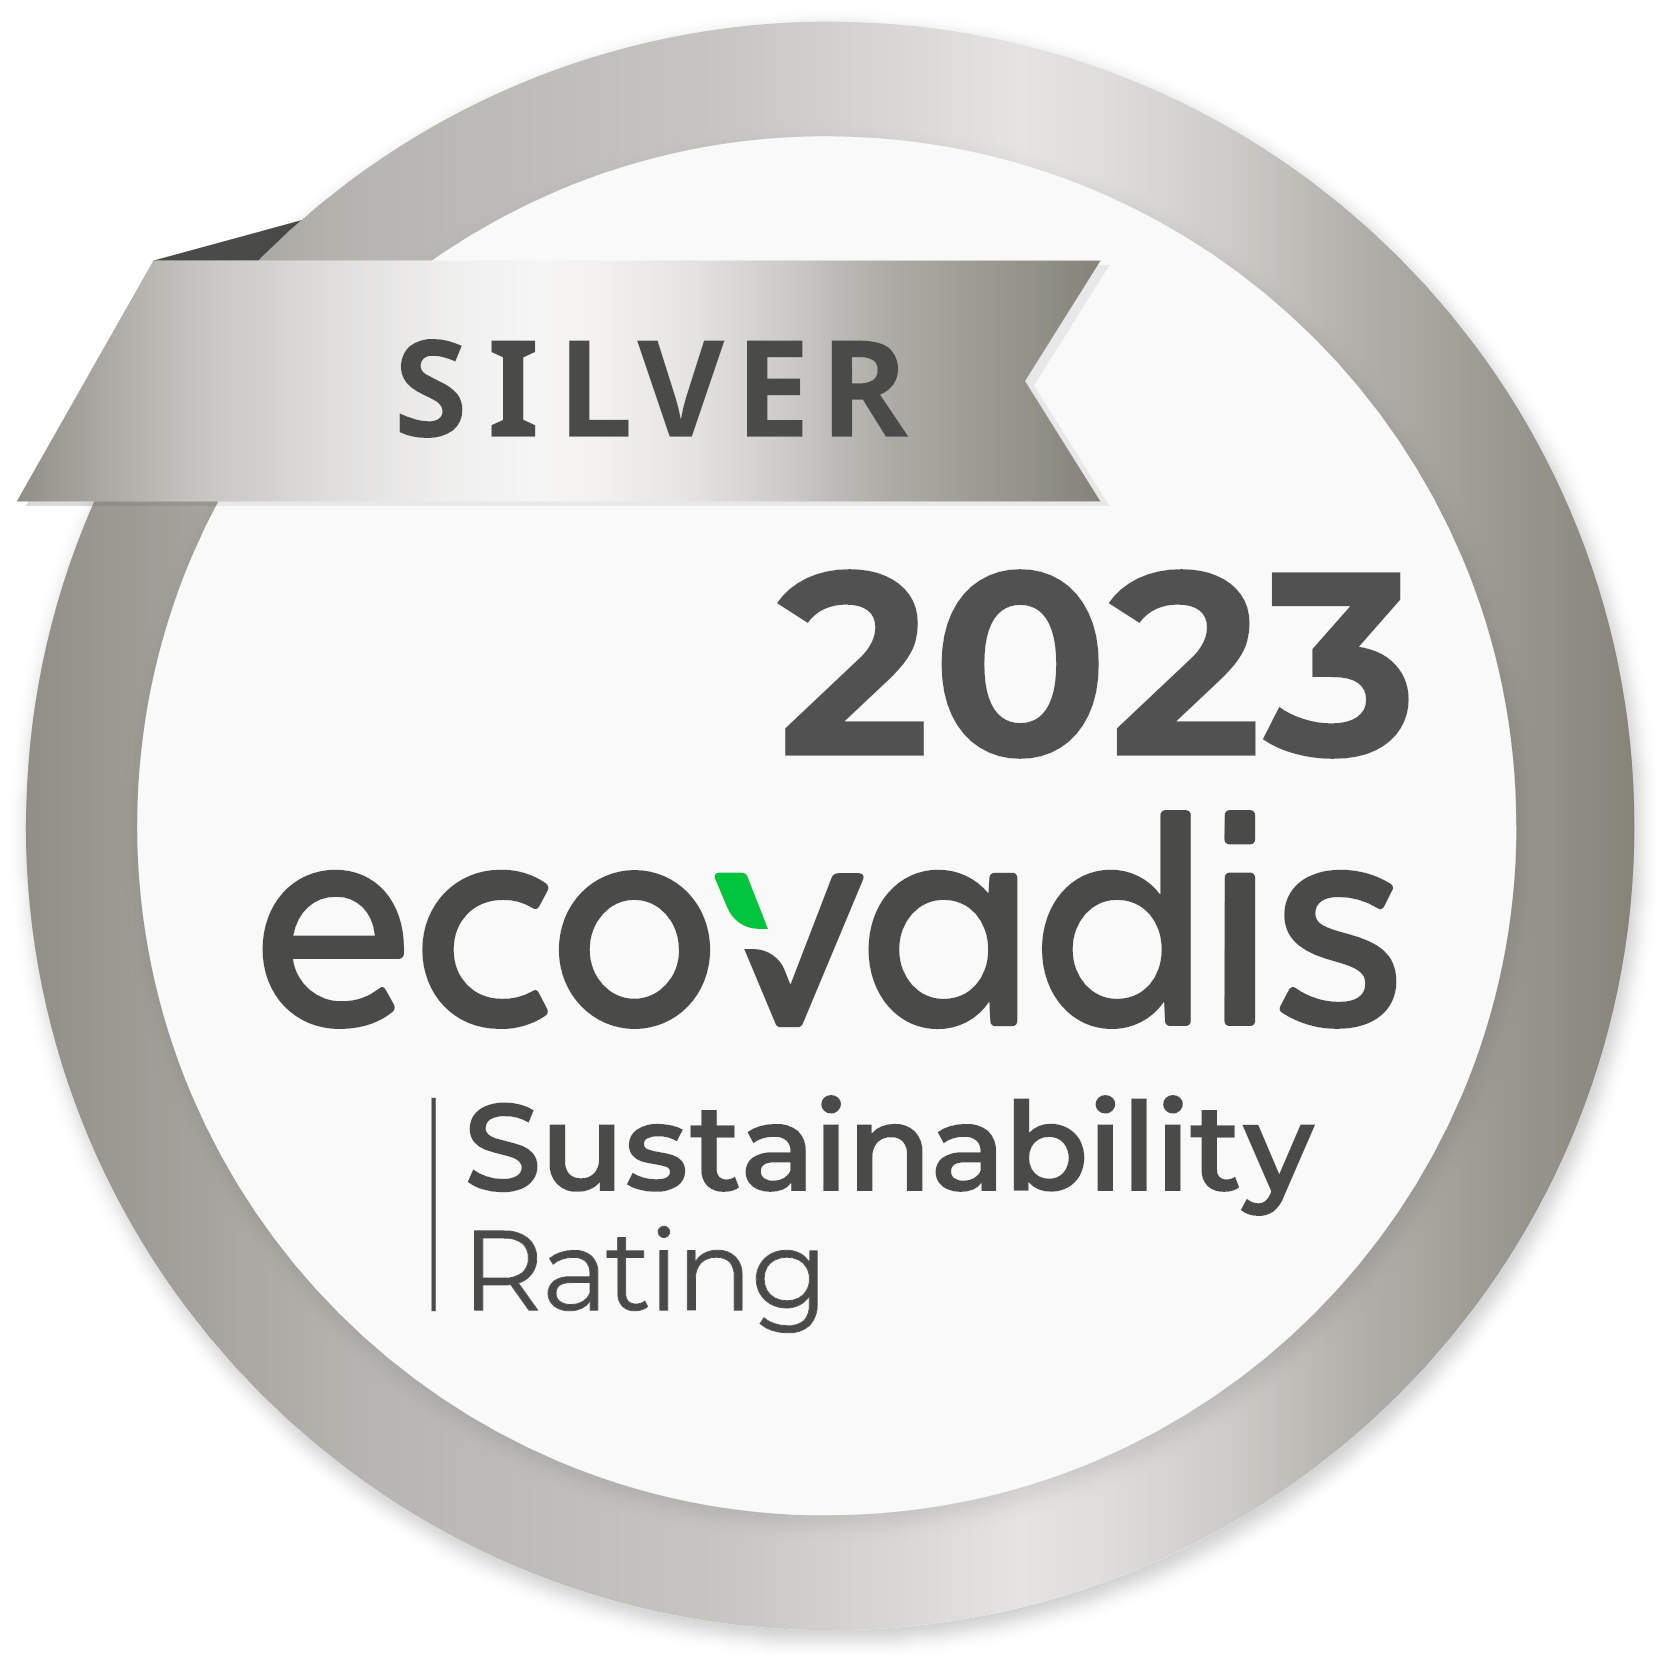 Silver 2023 Ecovadis Sustainability Rating